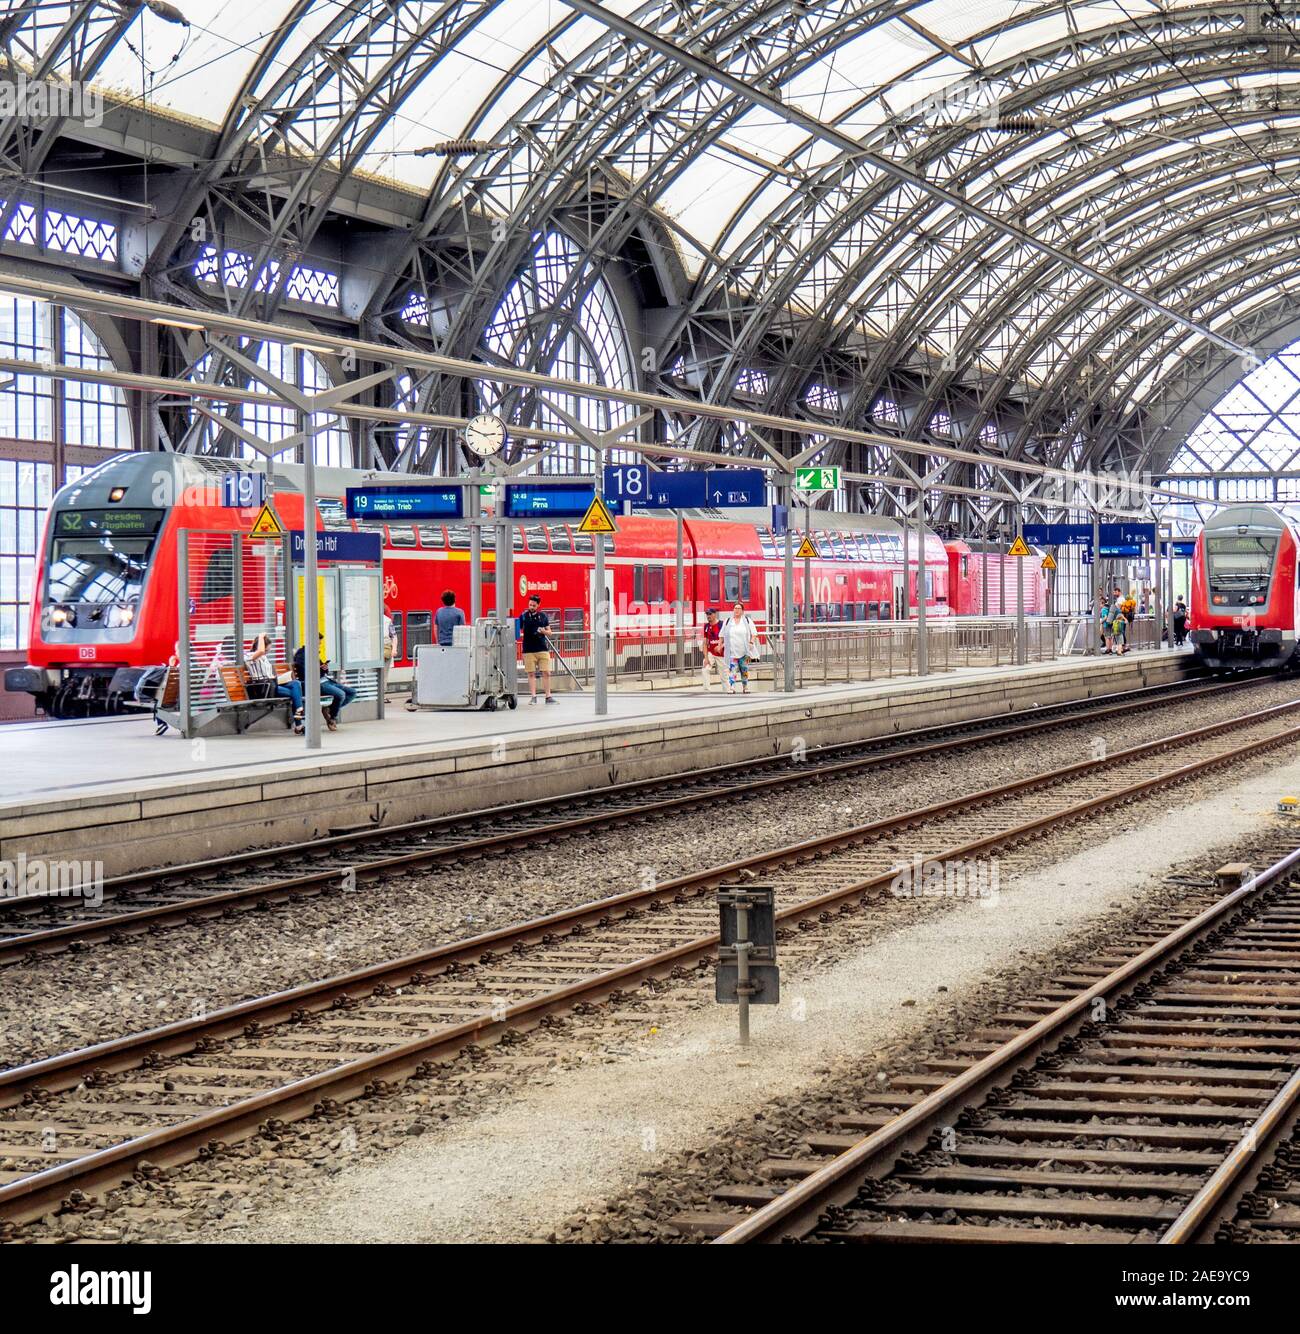 Dresden Hauptbahnhof HBF double decker passenger carriage rolling stock in train station with arched roof Dresden Saxony Germany. Stock Photo